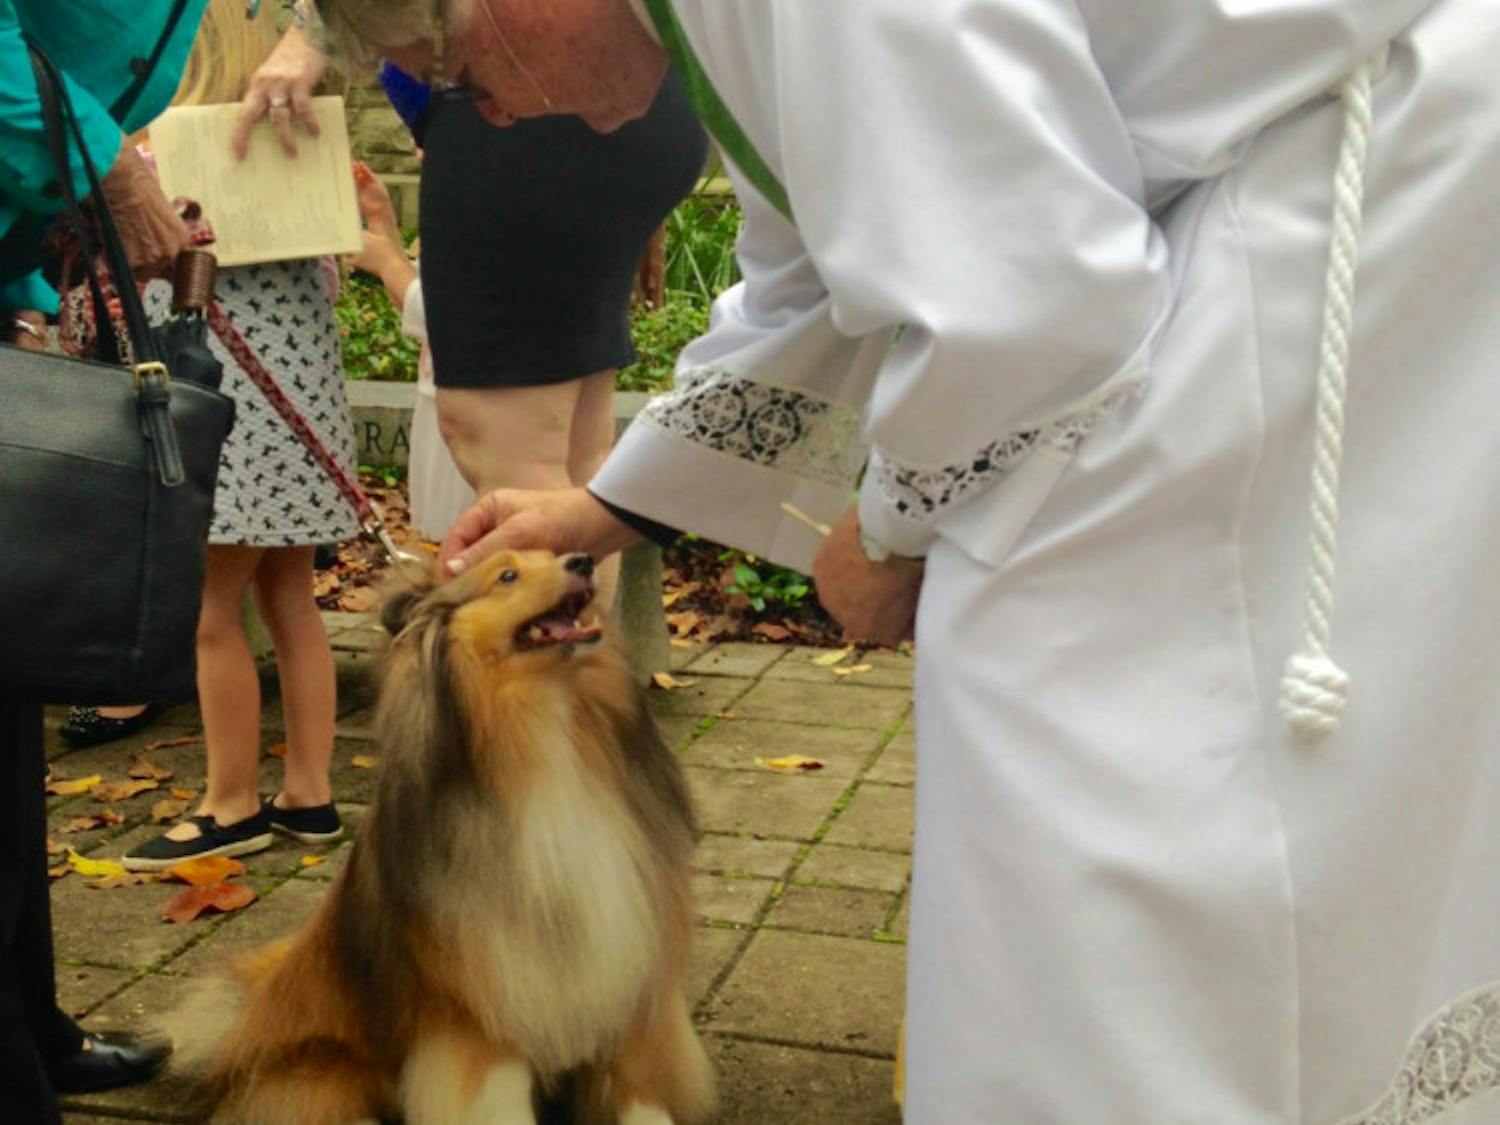 Sadie, a 6-year-old Shetland sheepdog gets blessed by the Rev. Reed Freeman at Holy Trinity Episcopal Church, located at 100 NE First St. before the Sunday service. About 100 animals were blessed during the annual event.